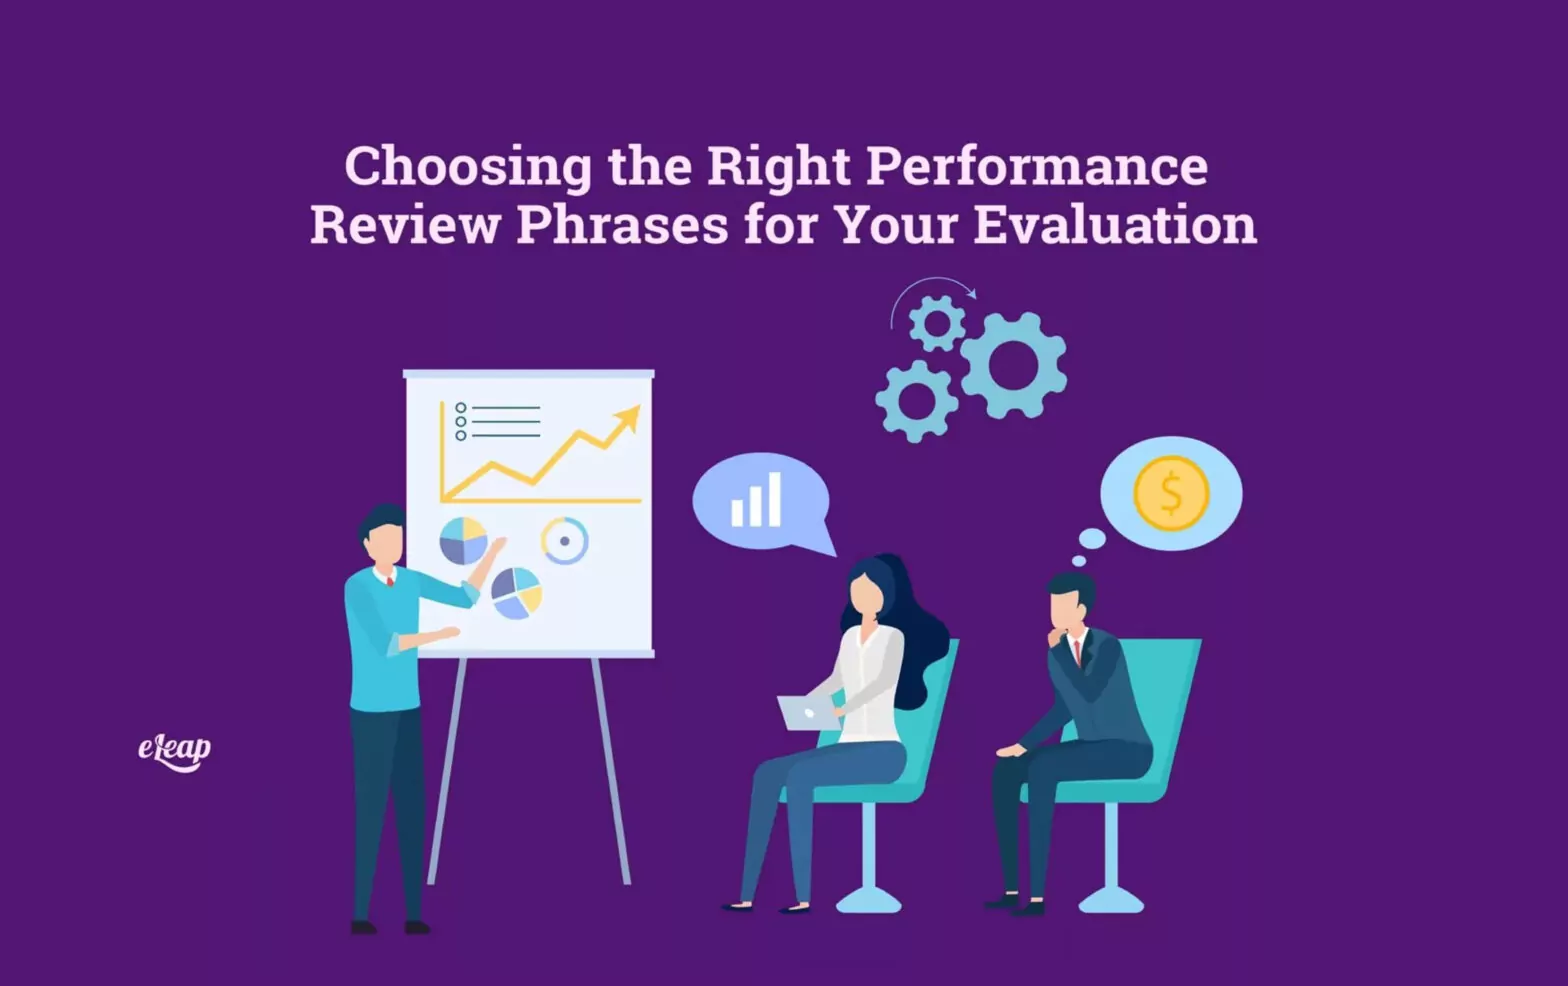 Choosing the Right Performance Review Phrases for Your Evaluation